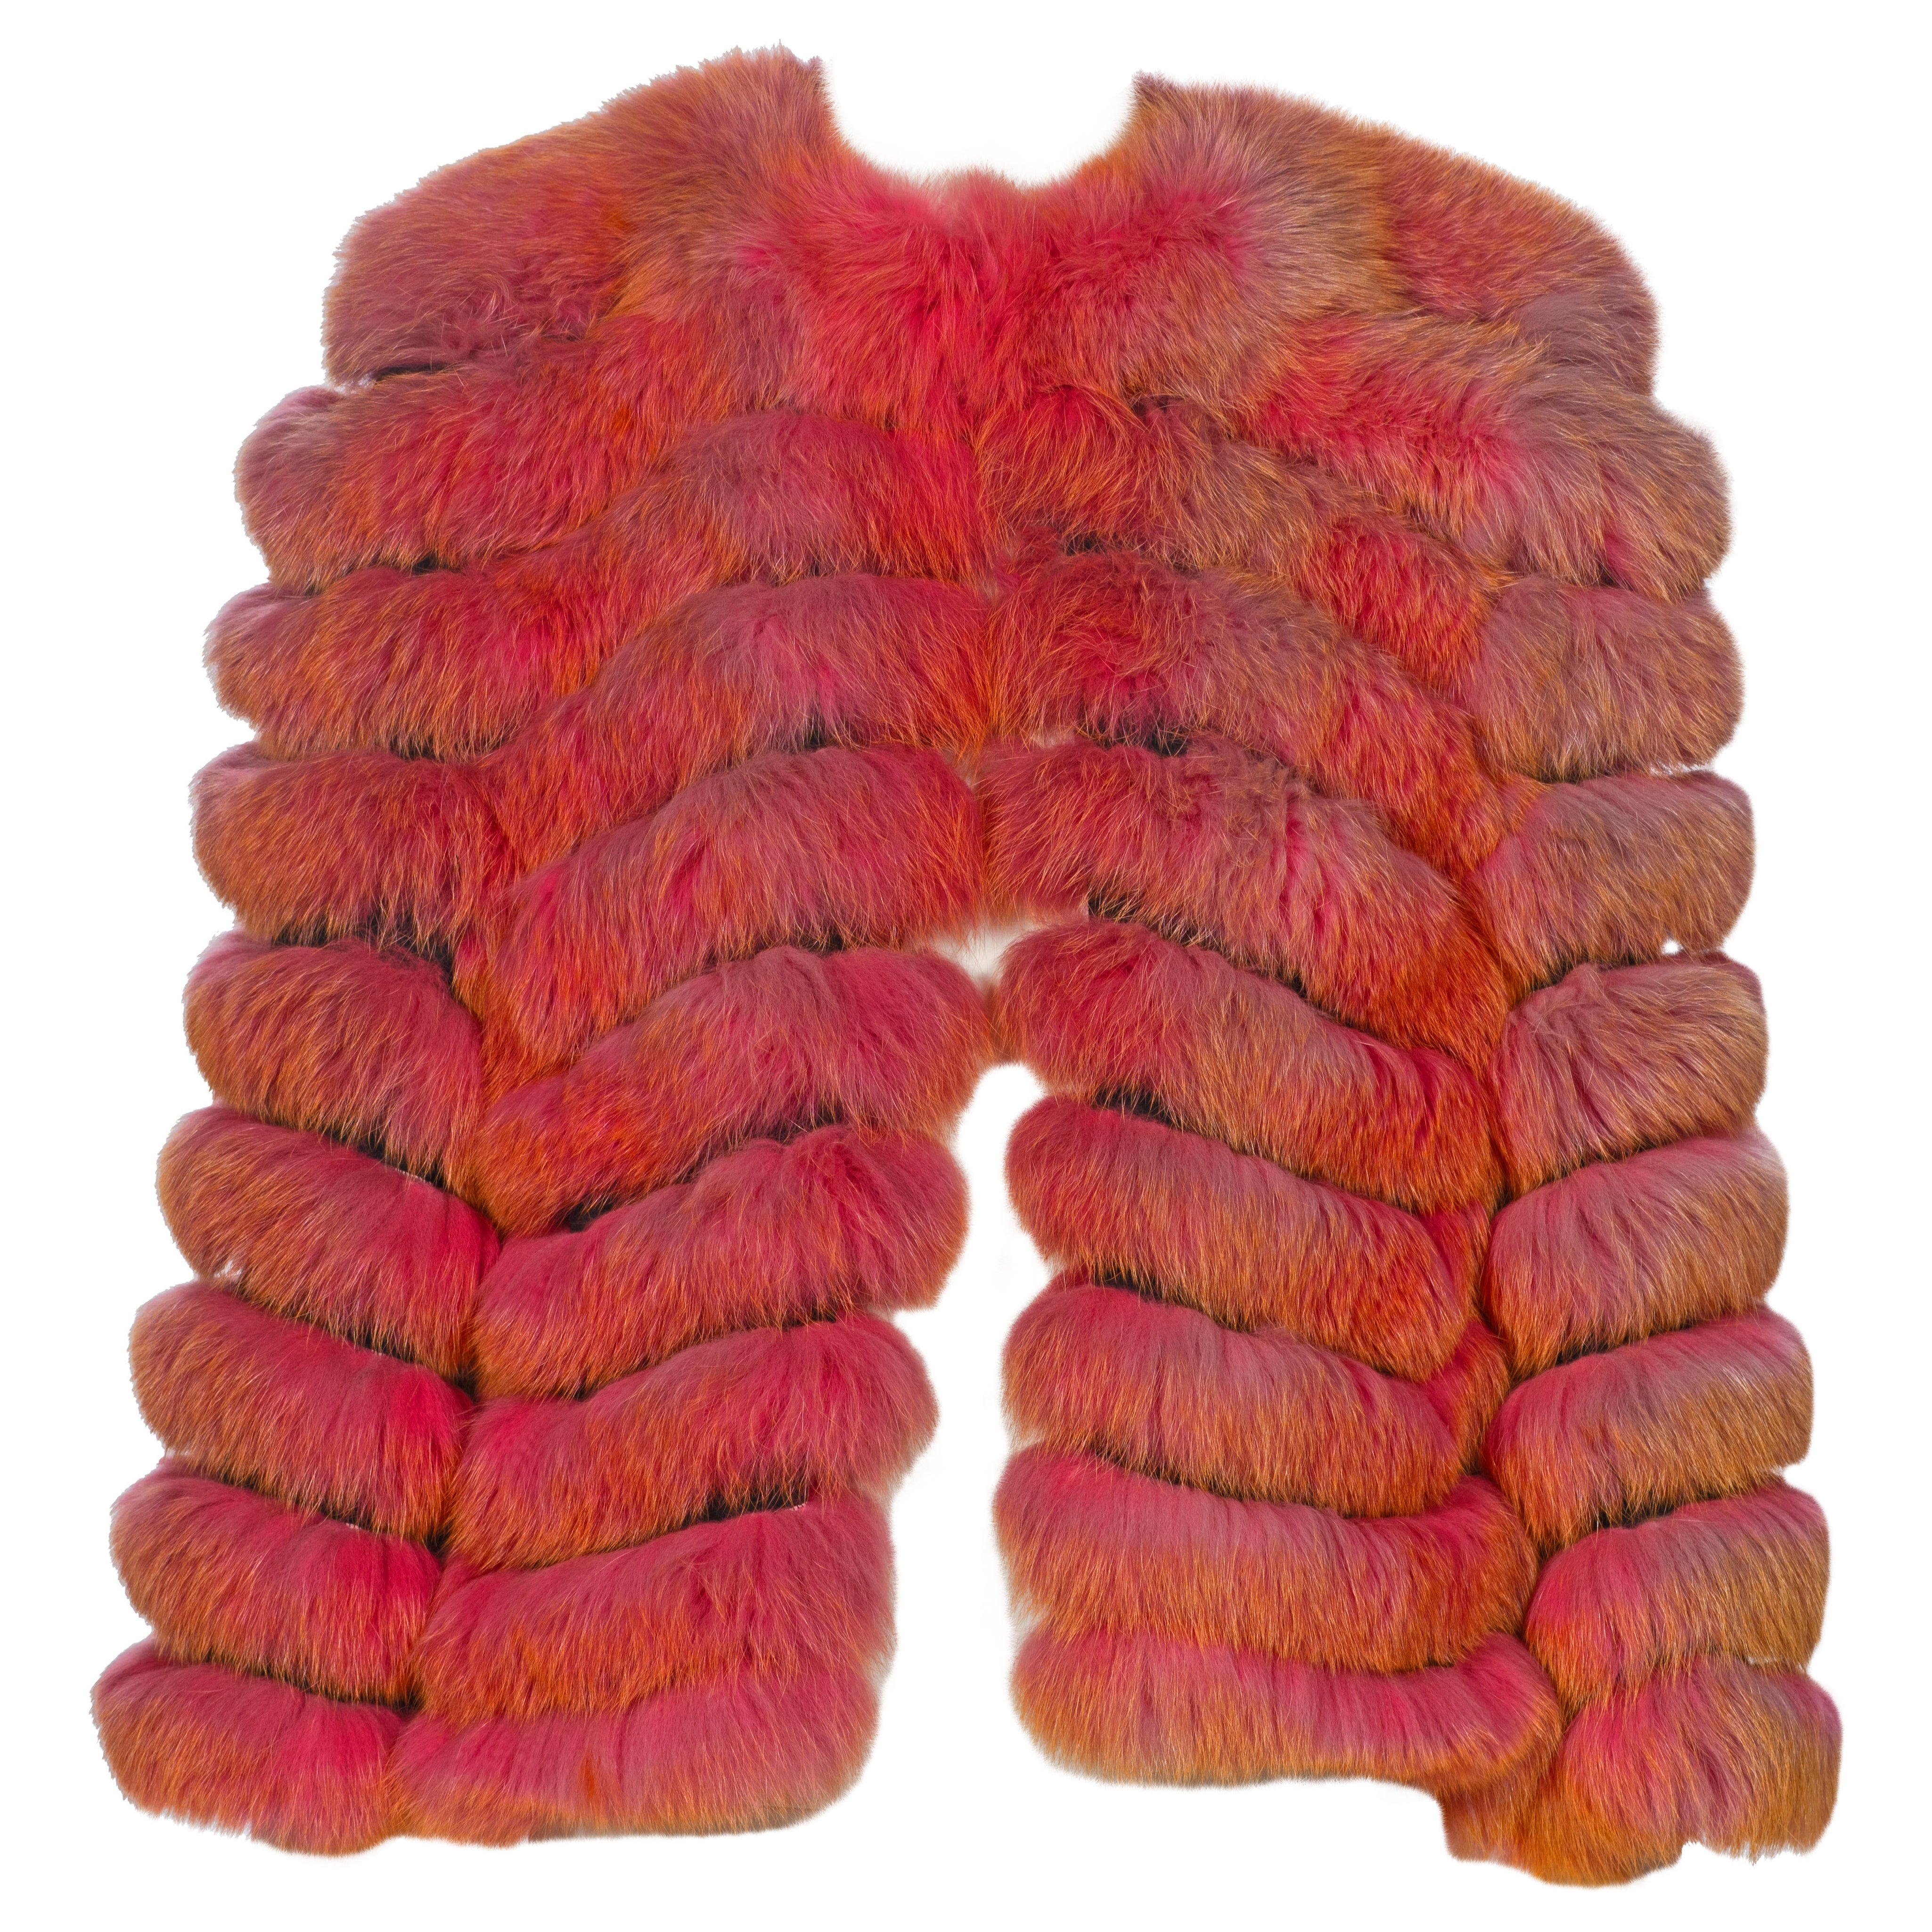 Dolce & Gabbana Fox Fur Jacket With Pink-to-Orange Gradient Coloration, fw 1999